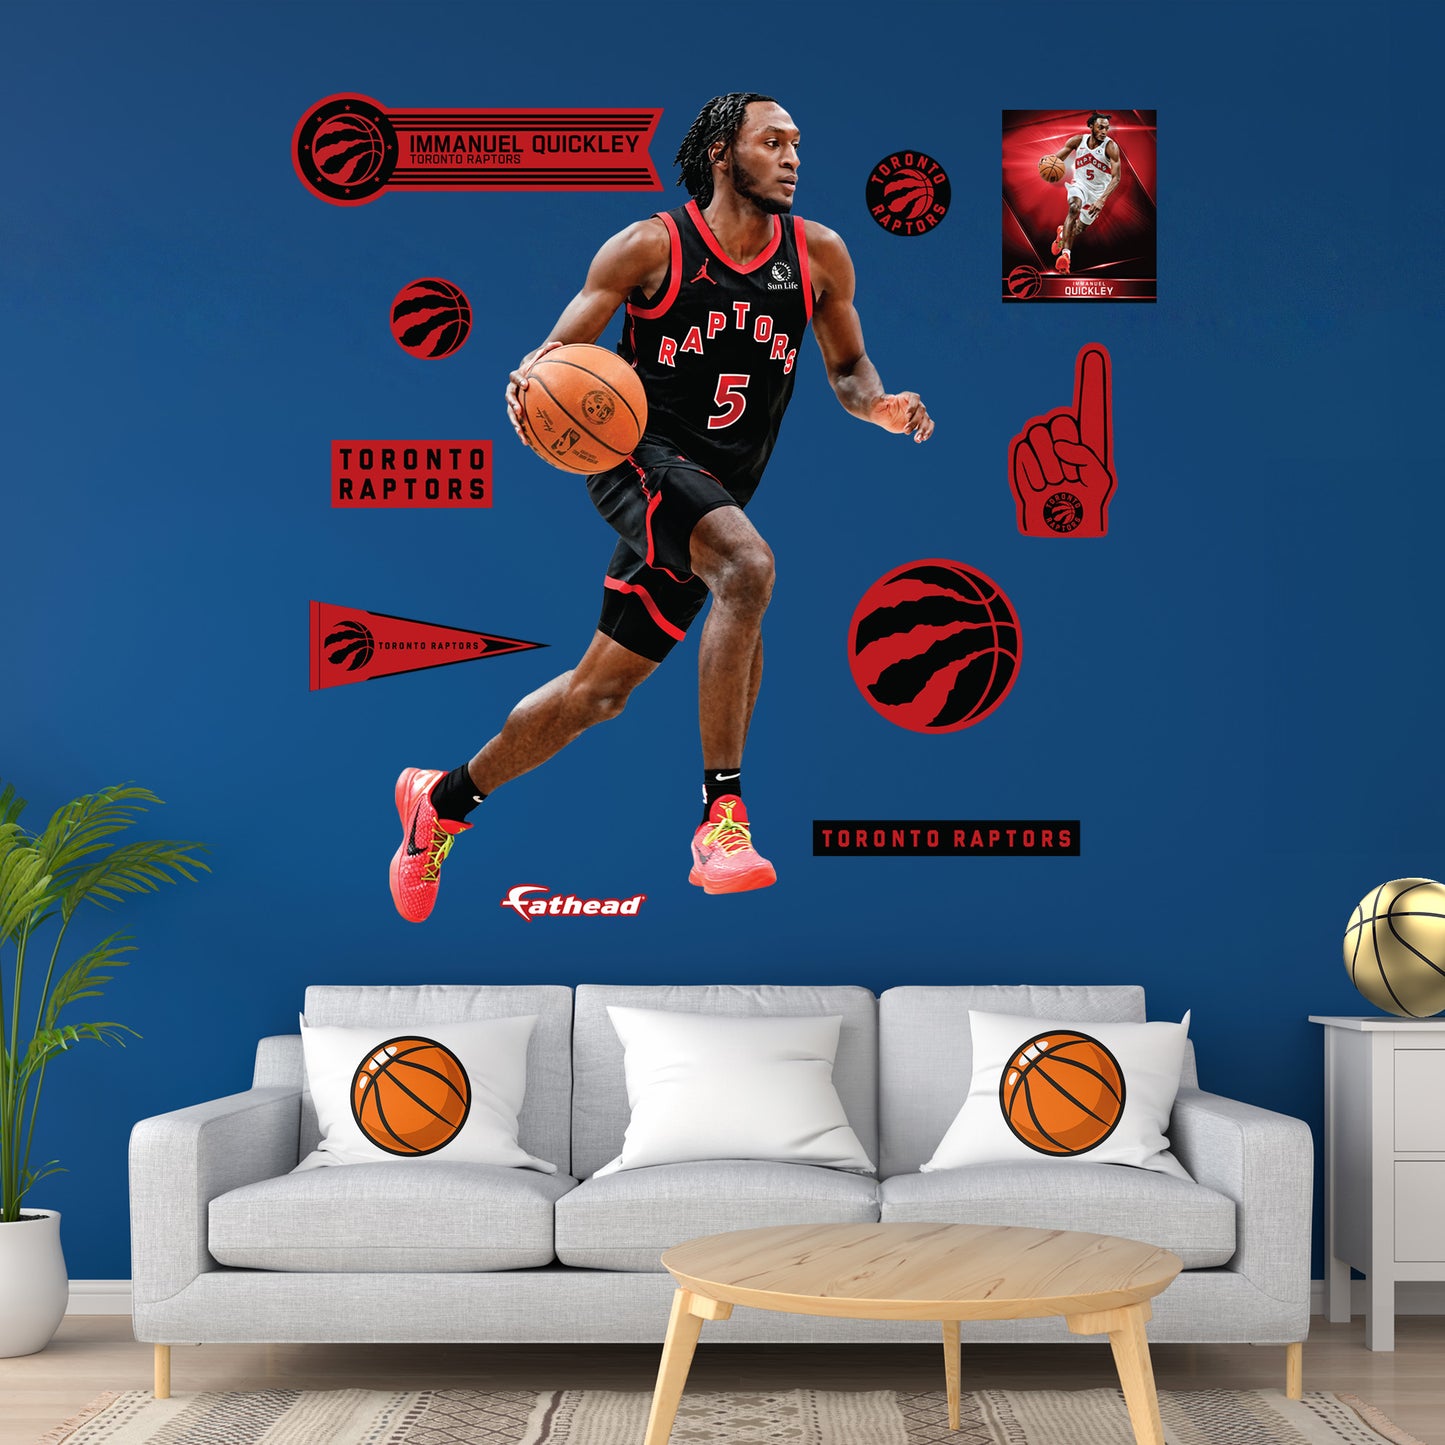 Toronto Raptors: Immanuel Quickley         - Officially Licensed NBA Removable     Adhesive Decal